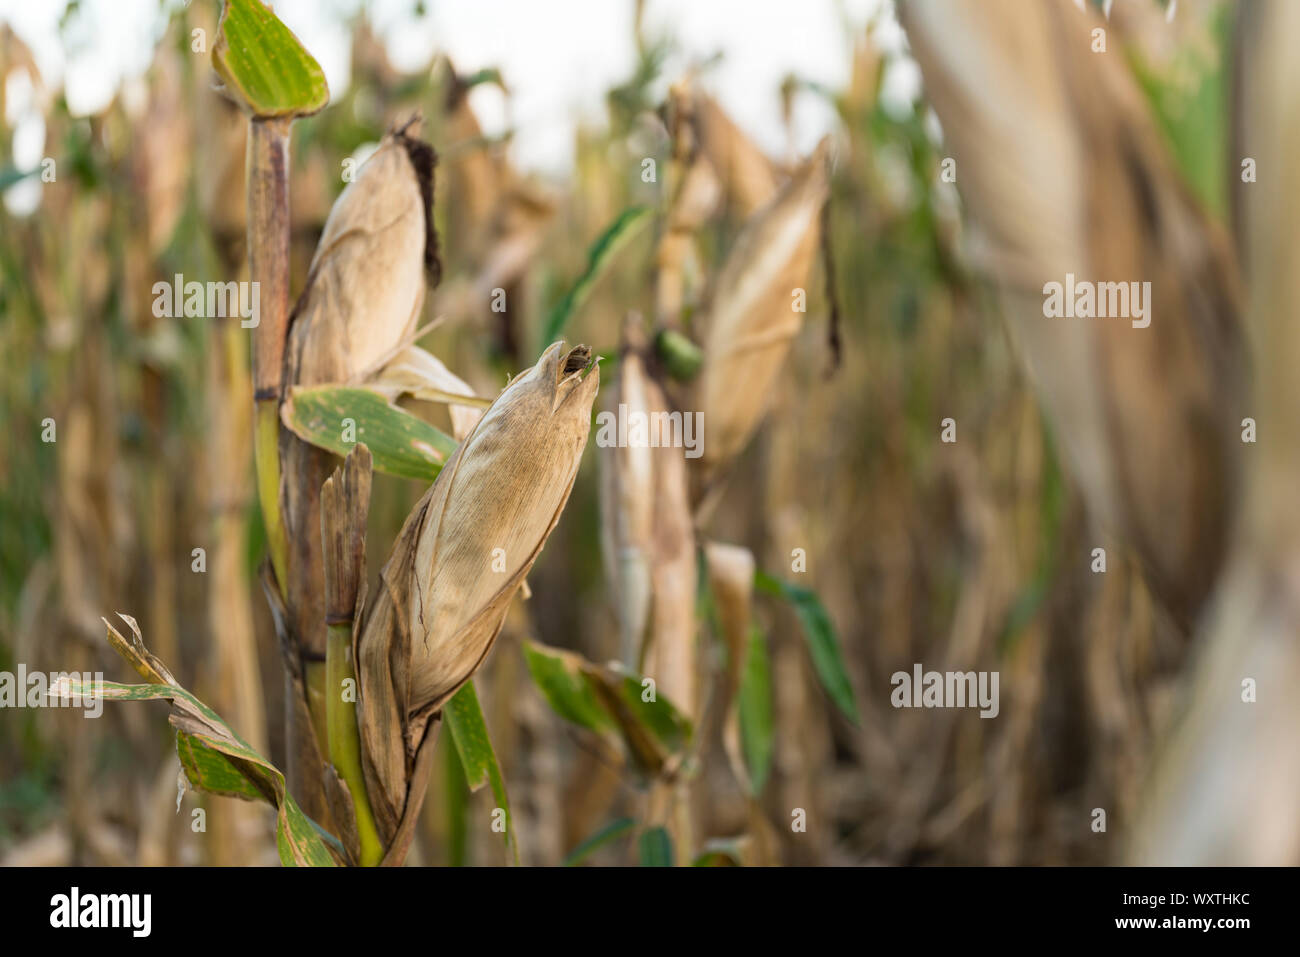 Corn in maize fields awaiting harvest in the dry season. Stock Photo